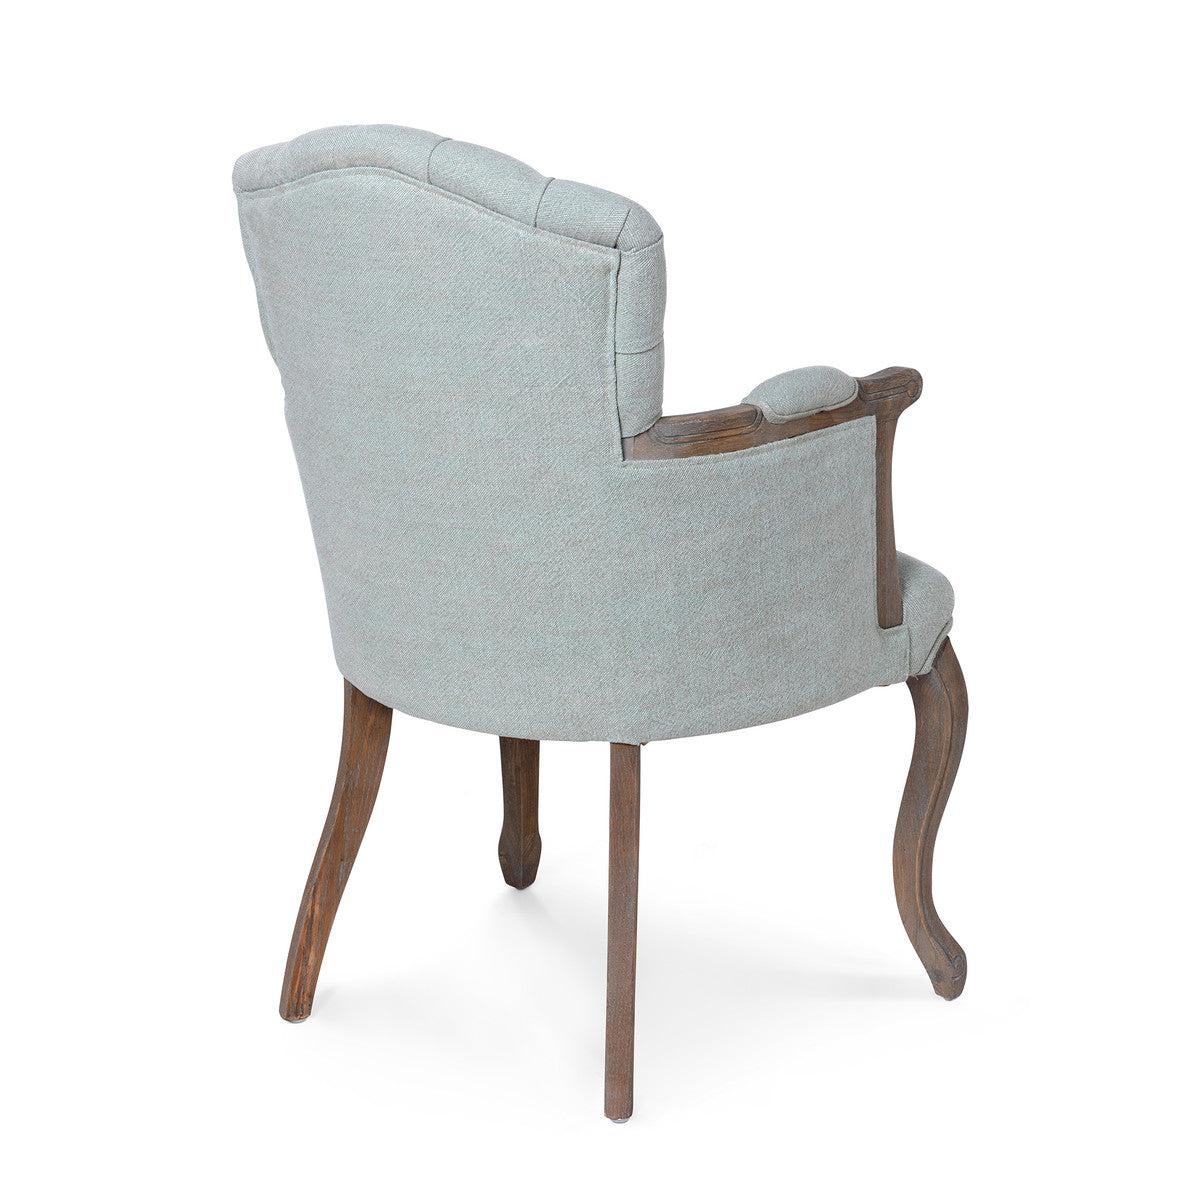 Babette Upholstered Vanity Chair-Accent Chair-tbgypsysoul